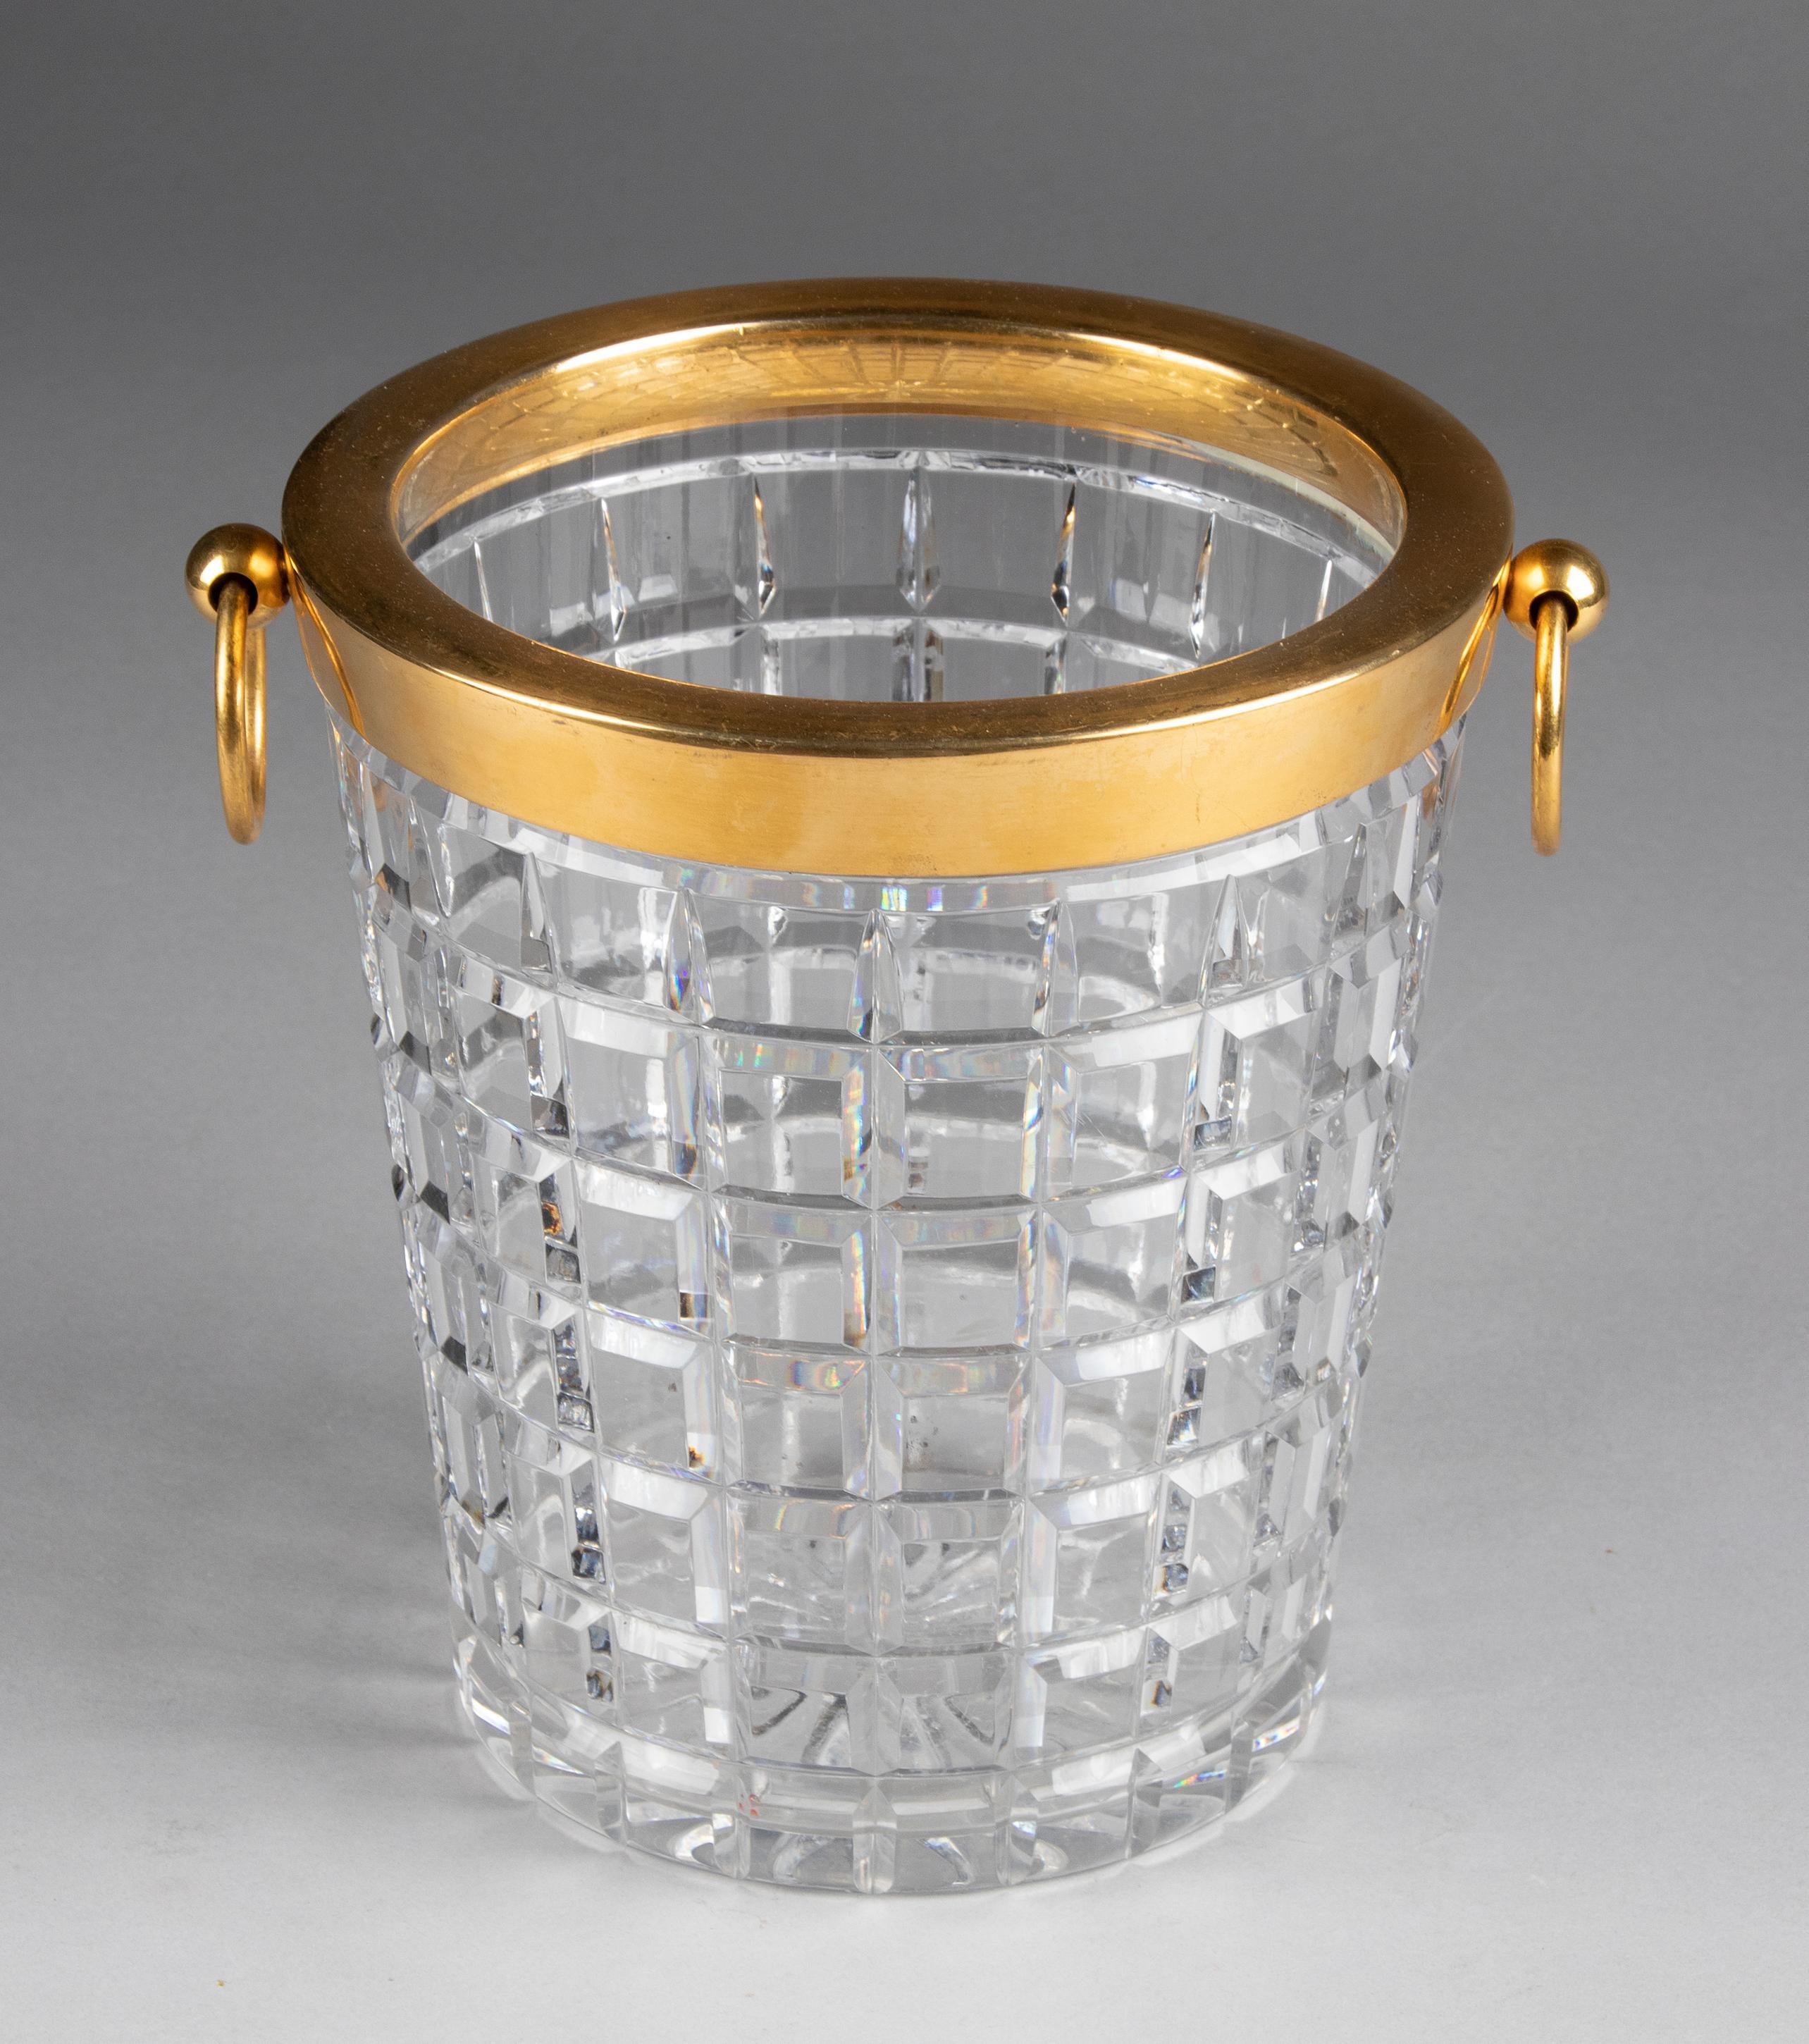 Beautiful large champagne cooler with gold-coloured copper rim. The crystal is of a good, heavy quality and has a nice deep cut in square shapes. The cooler is not marked, but it is presumably made by the Belgian maker Val Saint Lambert. The cooler